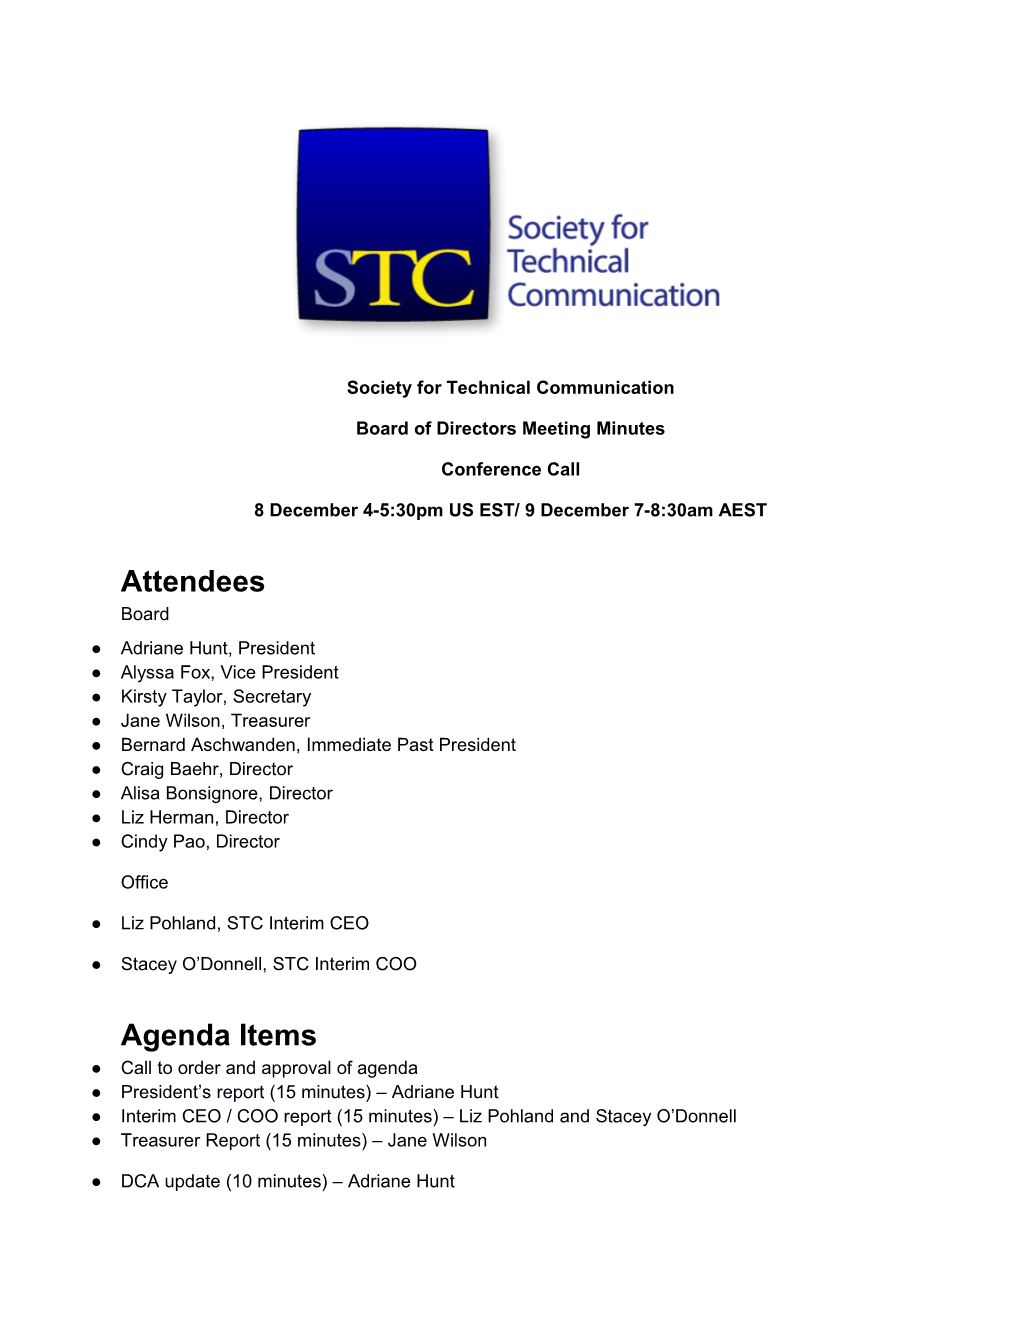 Society for Technical Communication s1